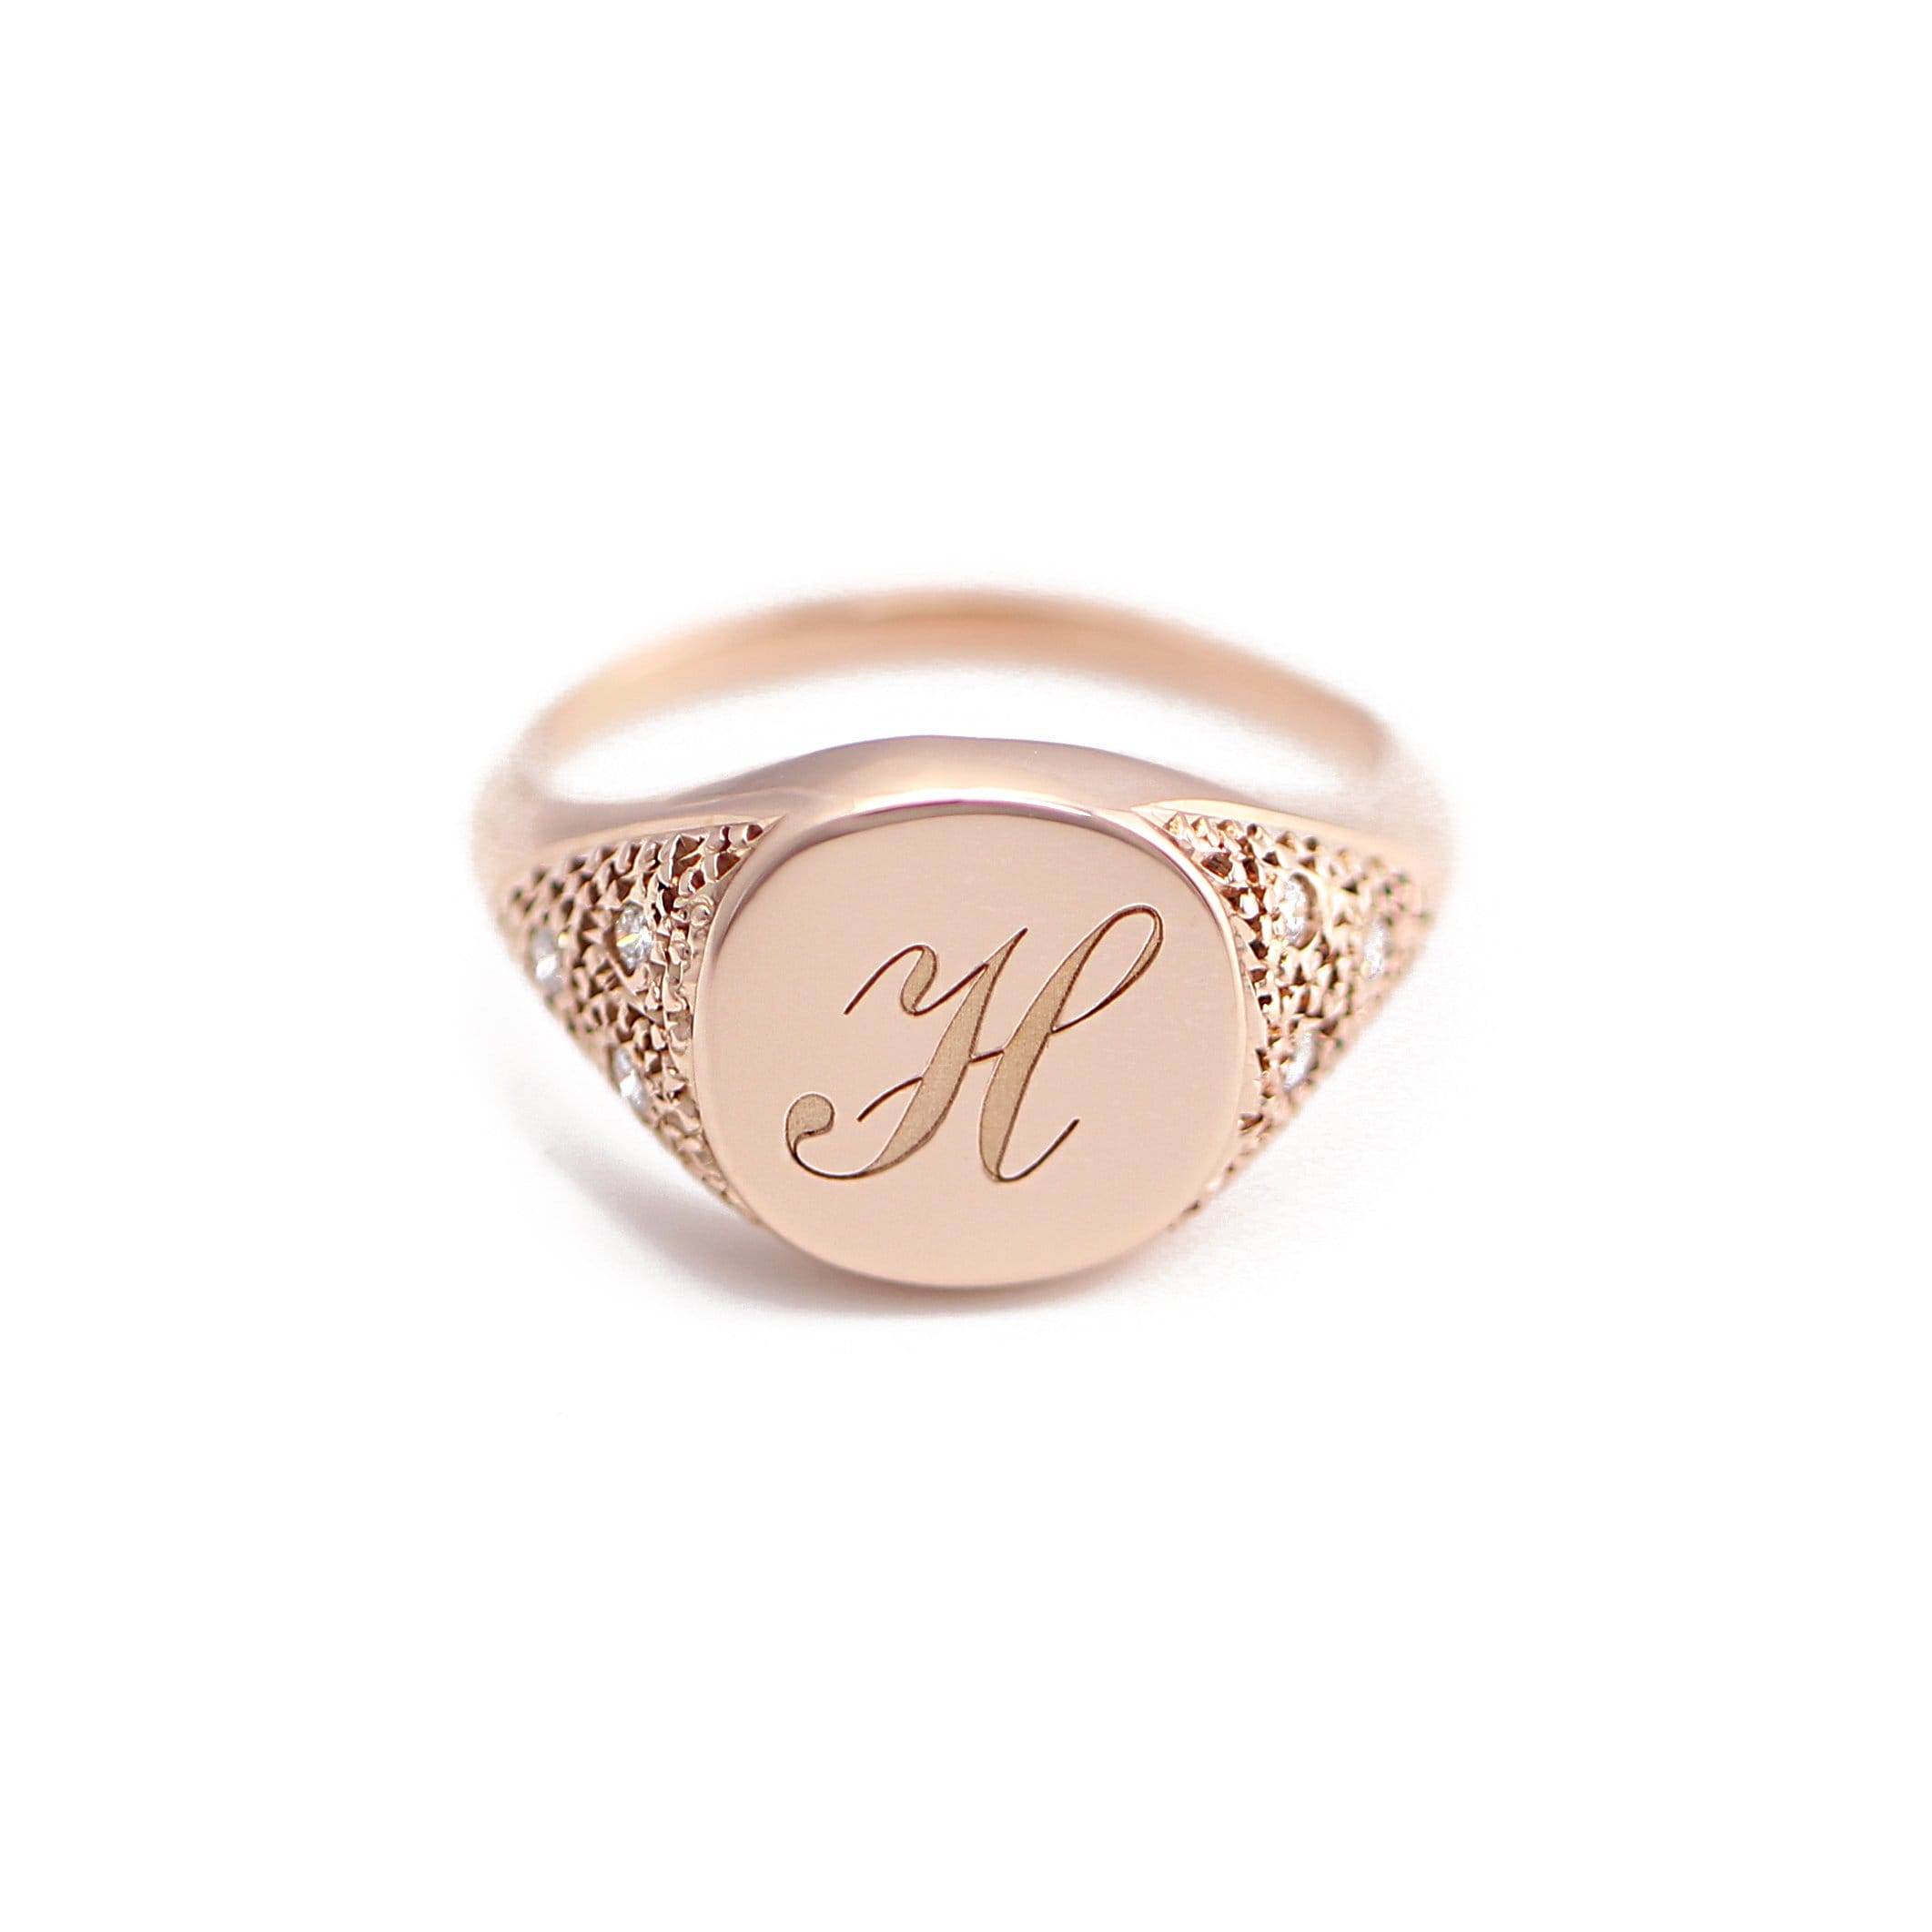 NEW Collection landed- beautiful signet rings to make your heart sing 😍 —  No.13 Jewellery